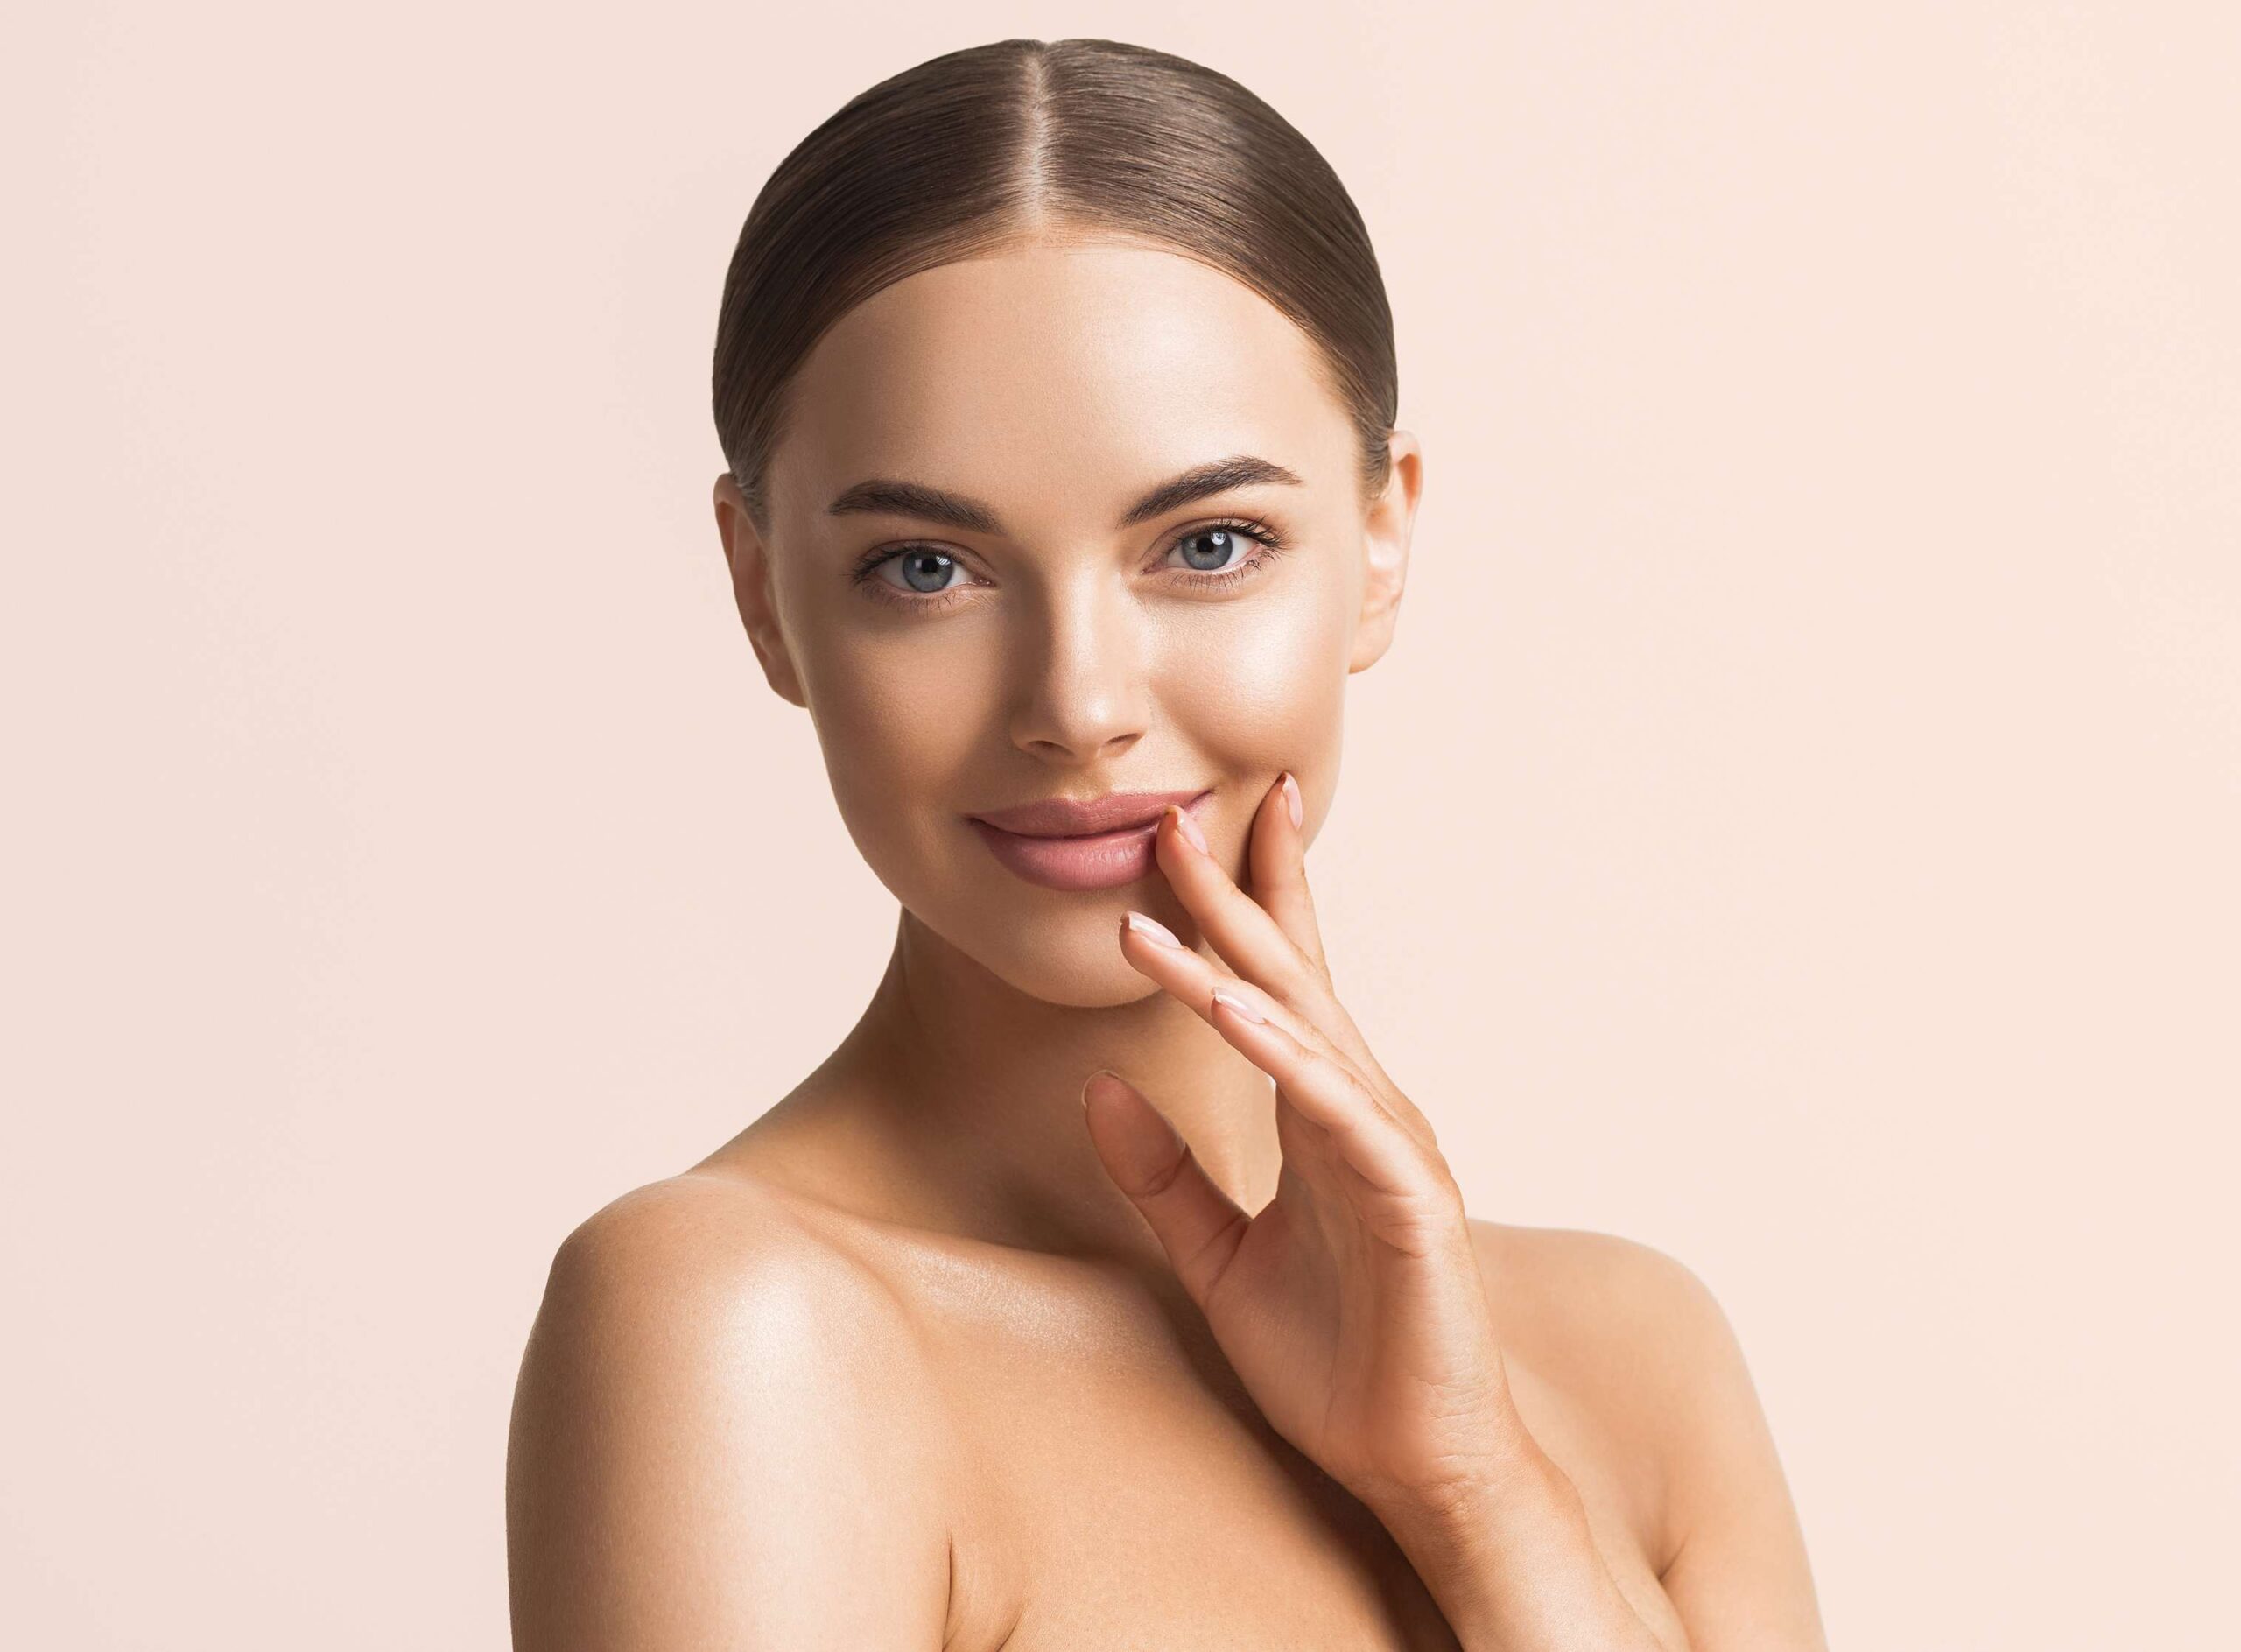 Clean Beautiful Model Face | New Look Skin Center Medical Spa in Glendale, Encino and Irvine, CA